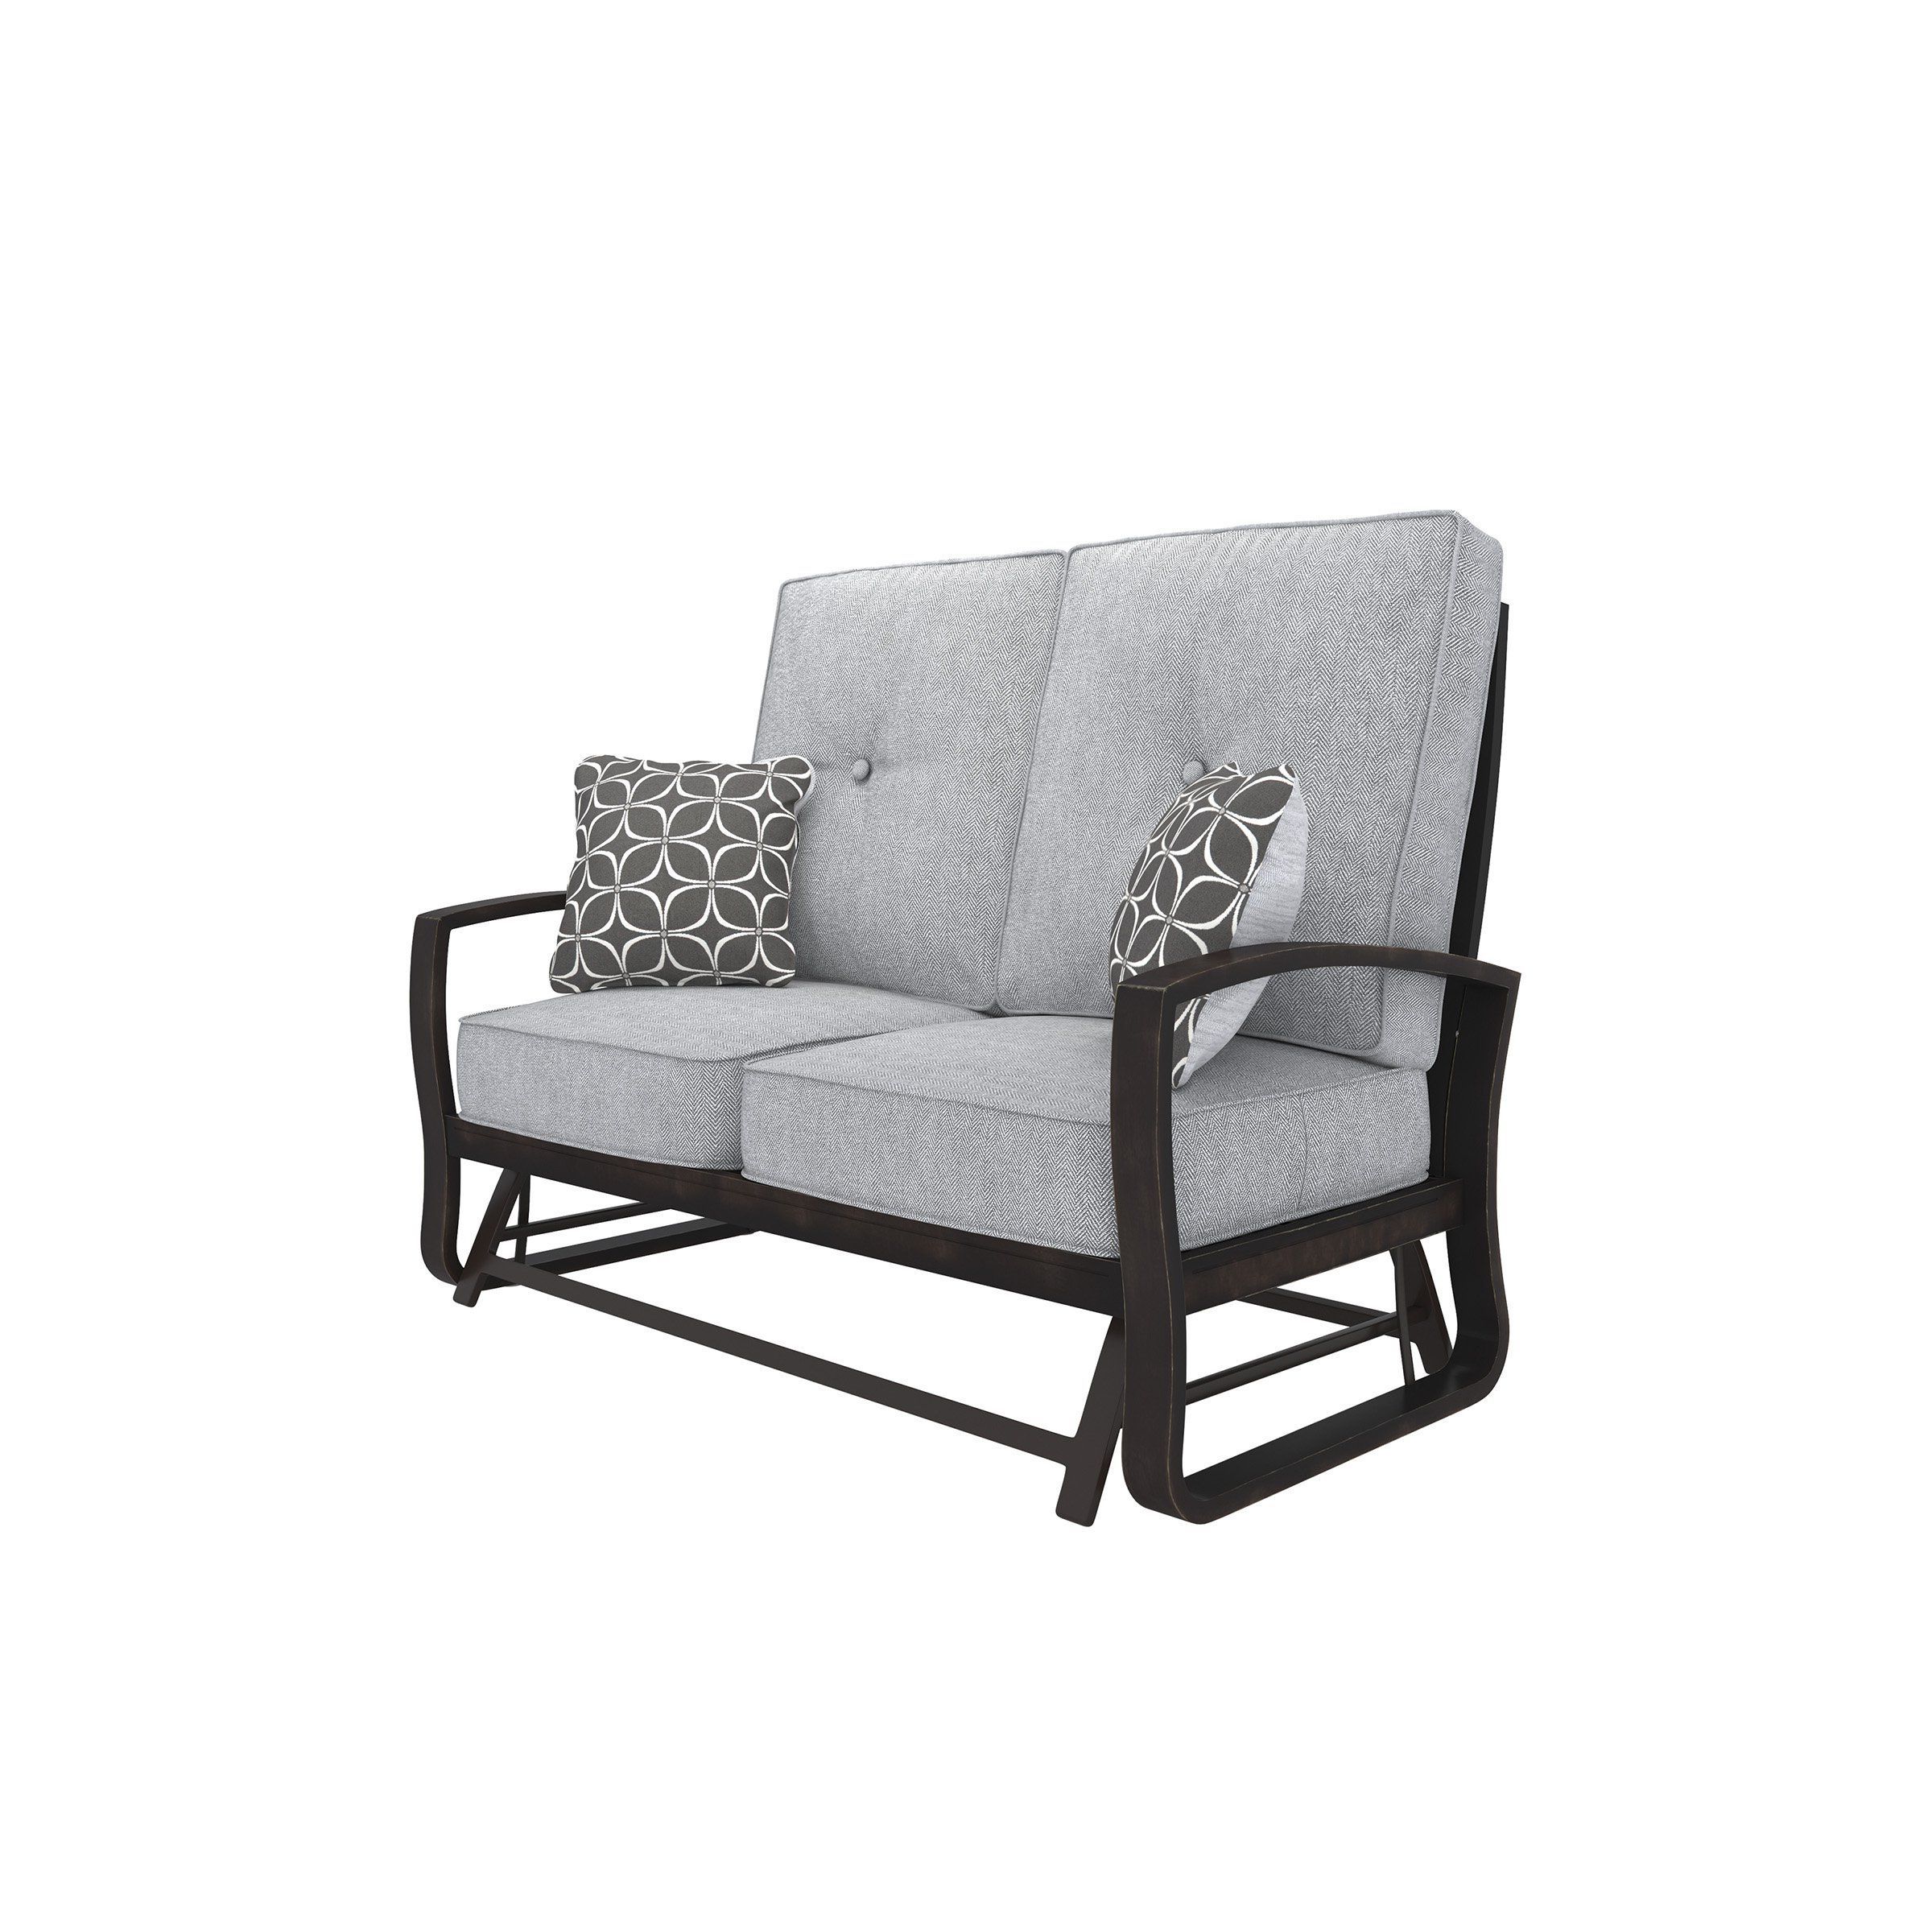 Most Recent Outdoor Loveseat Gliders With Cushion Regarding Signature Design P414 835 Castle Island Brown Gray Outdoor (View 3 of 25)